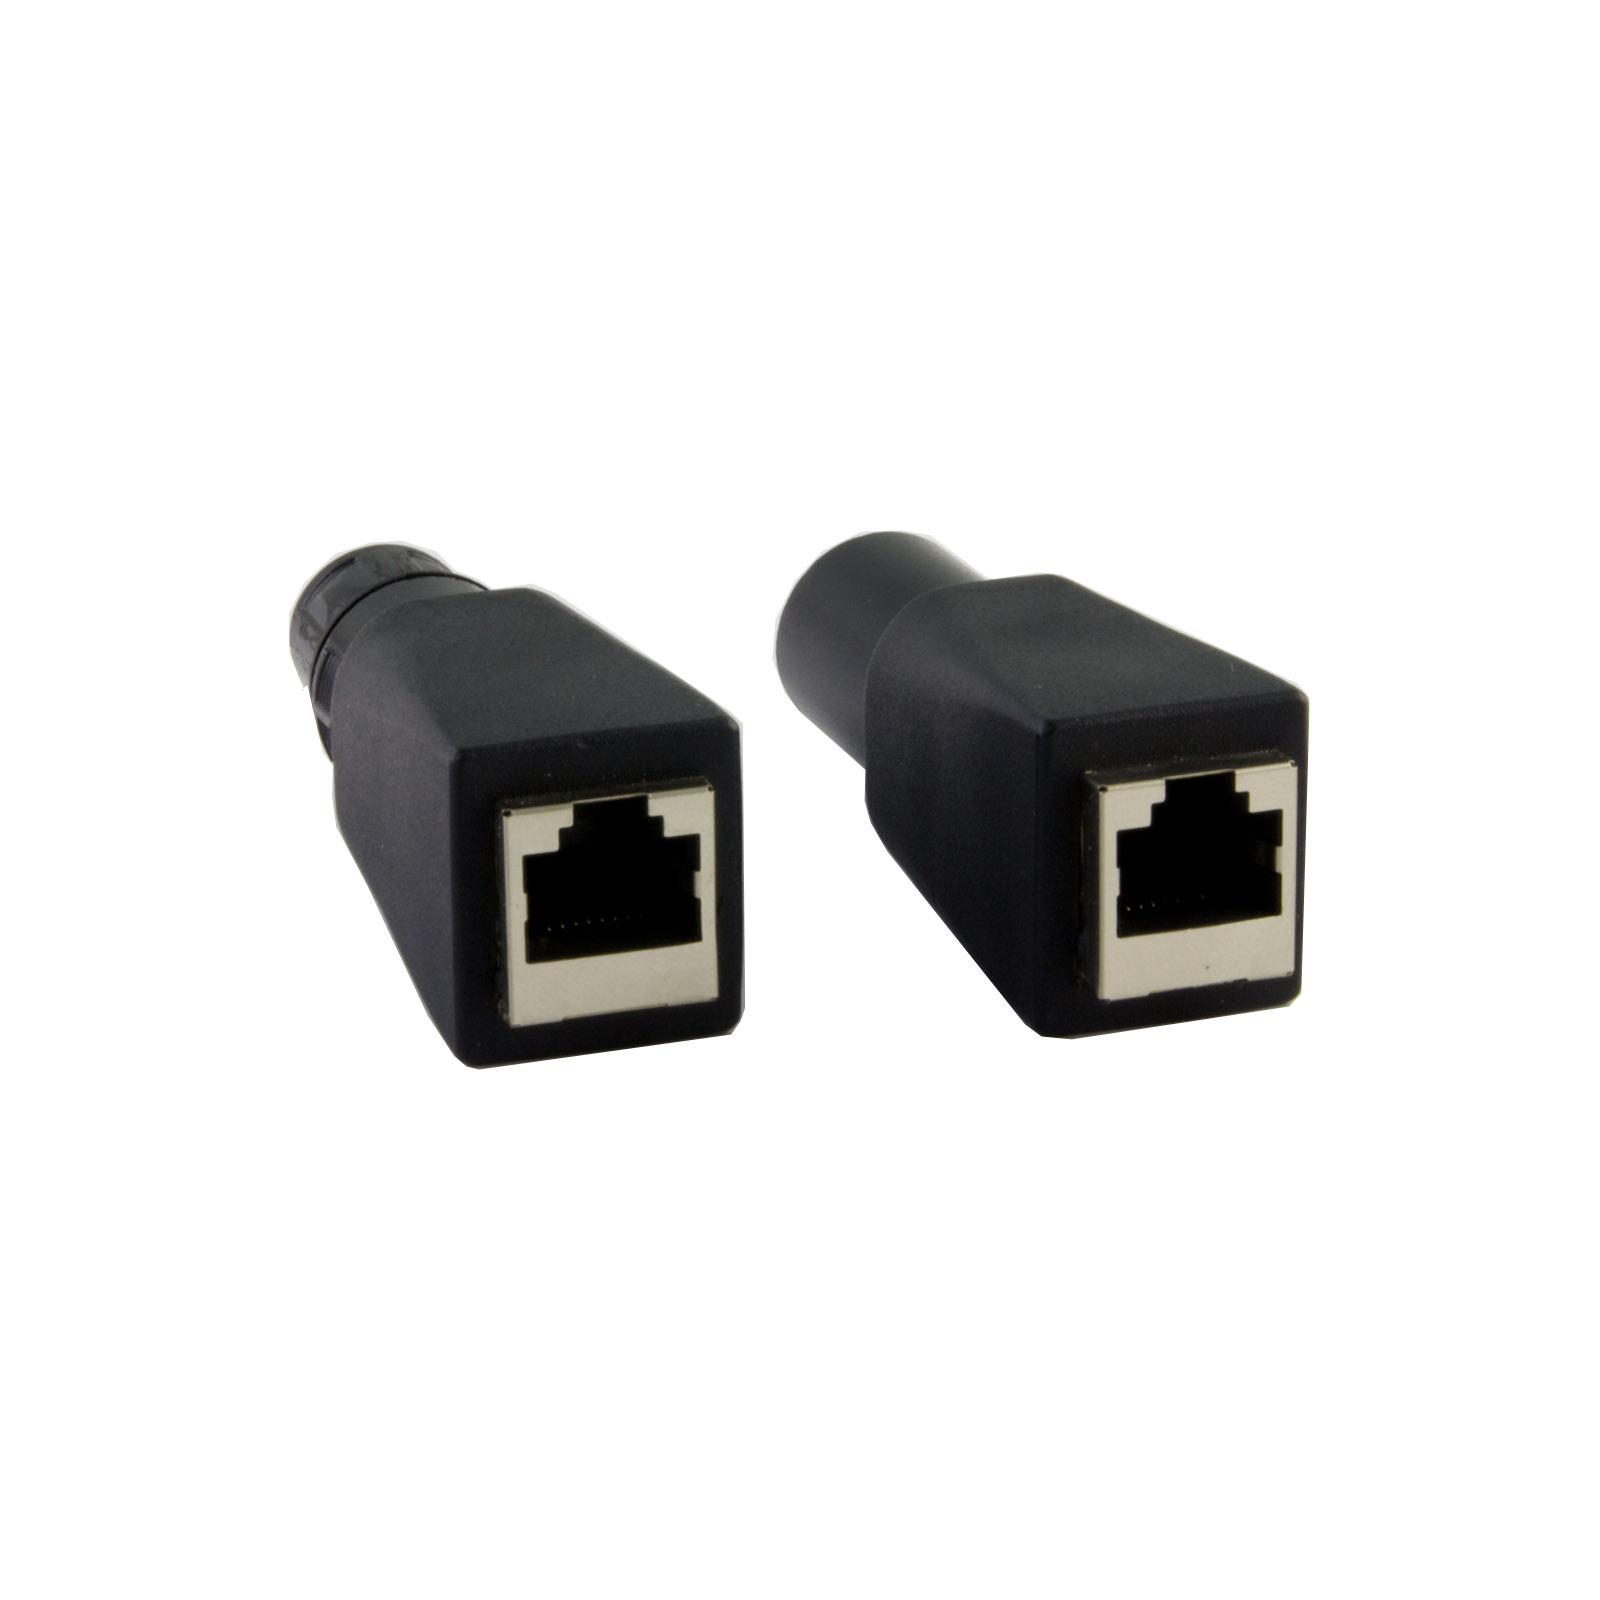 XLR-3 to RJ45 Adapter Connector Pair | Diode LED